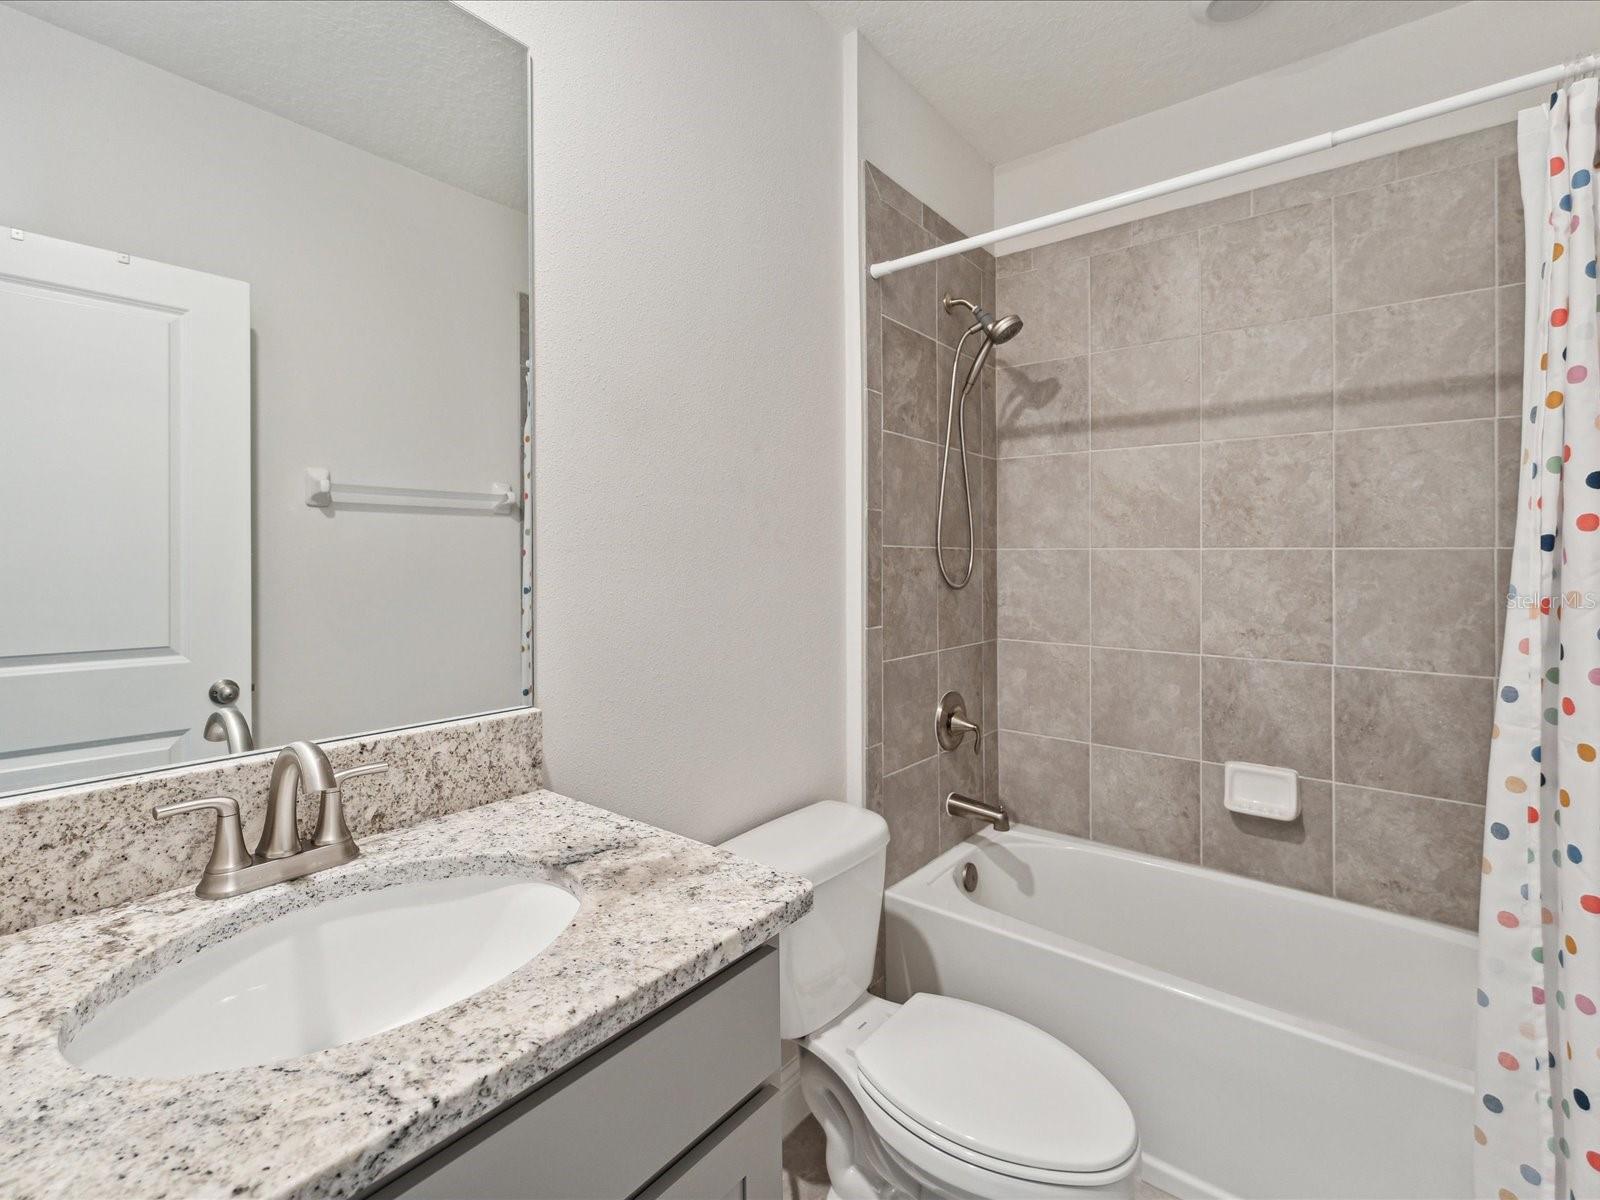 The 2nd full bathroom is used by the 2nd and 3rd bedroom and is left of the staircase.